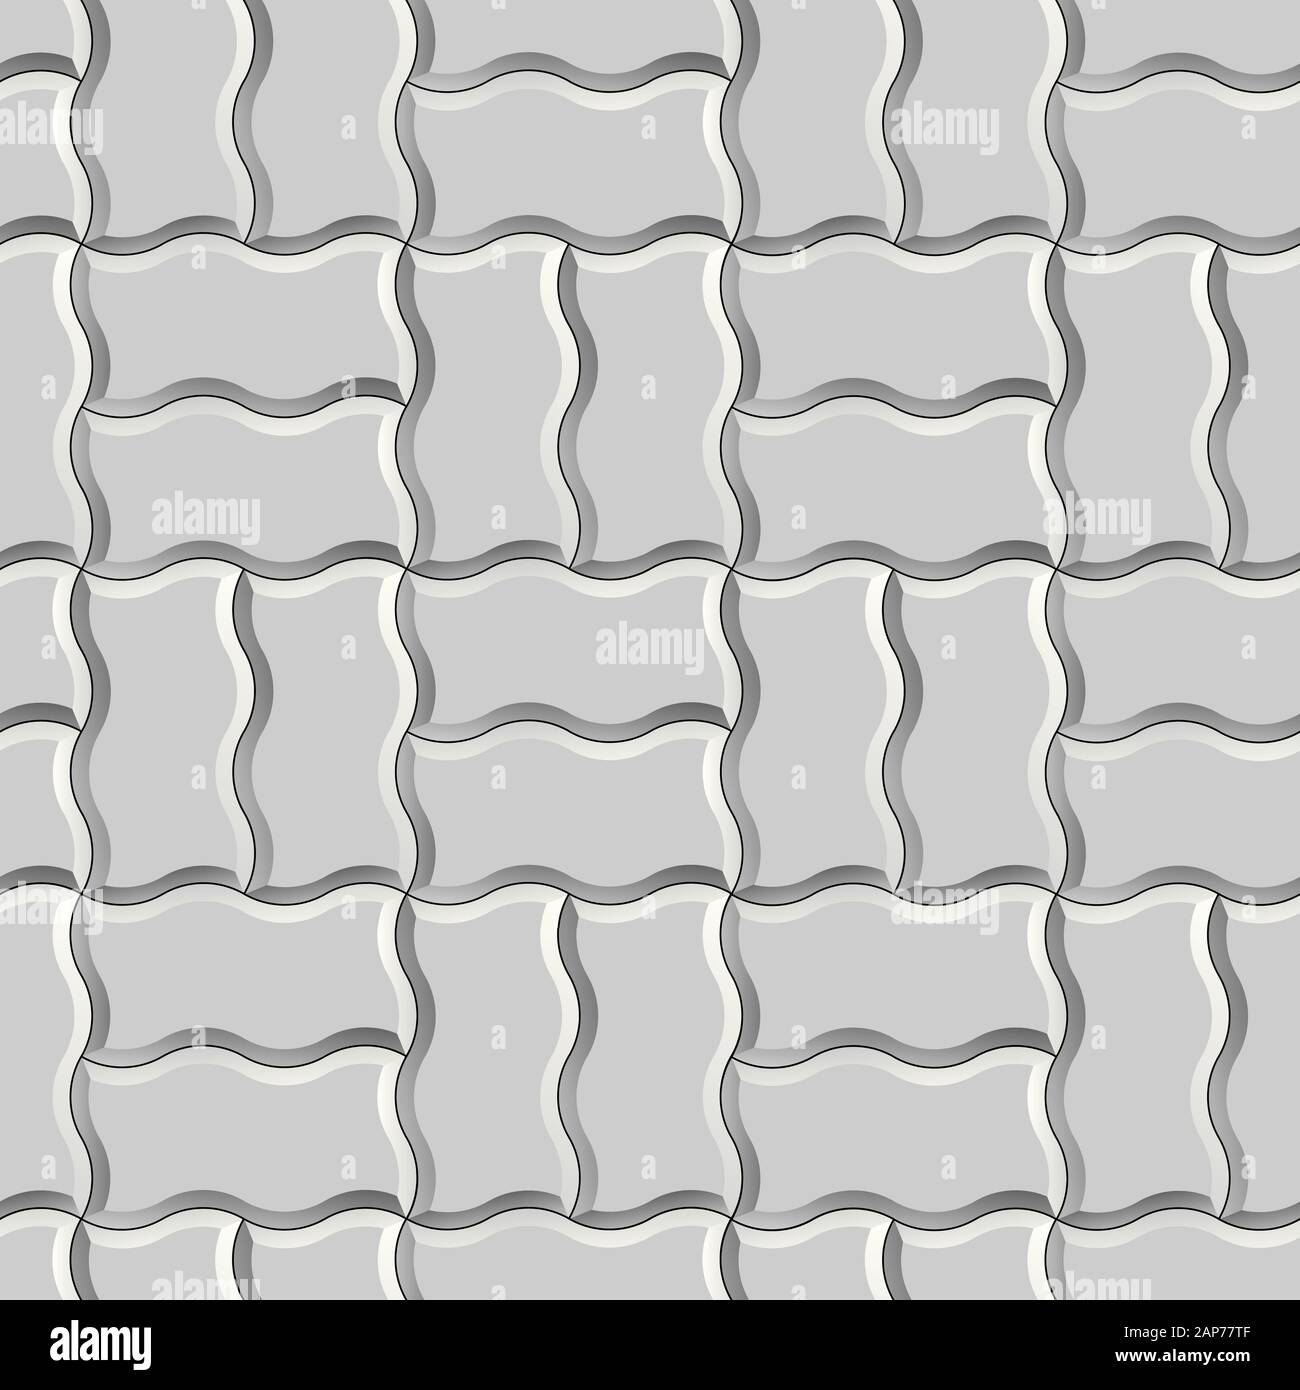 Seamless texture of gray concrete pavement tiles. 3D repeating pattern of wave tiles Stock Photo